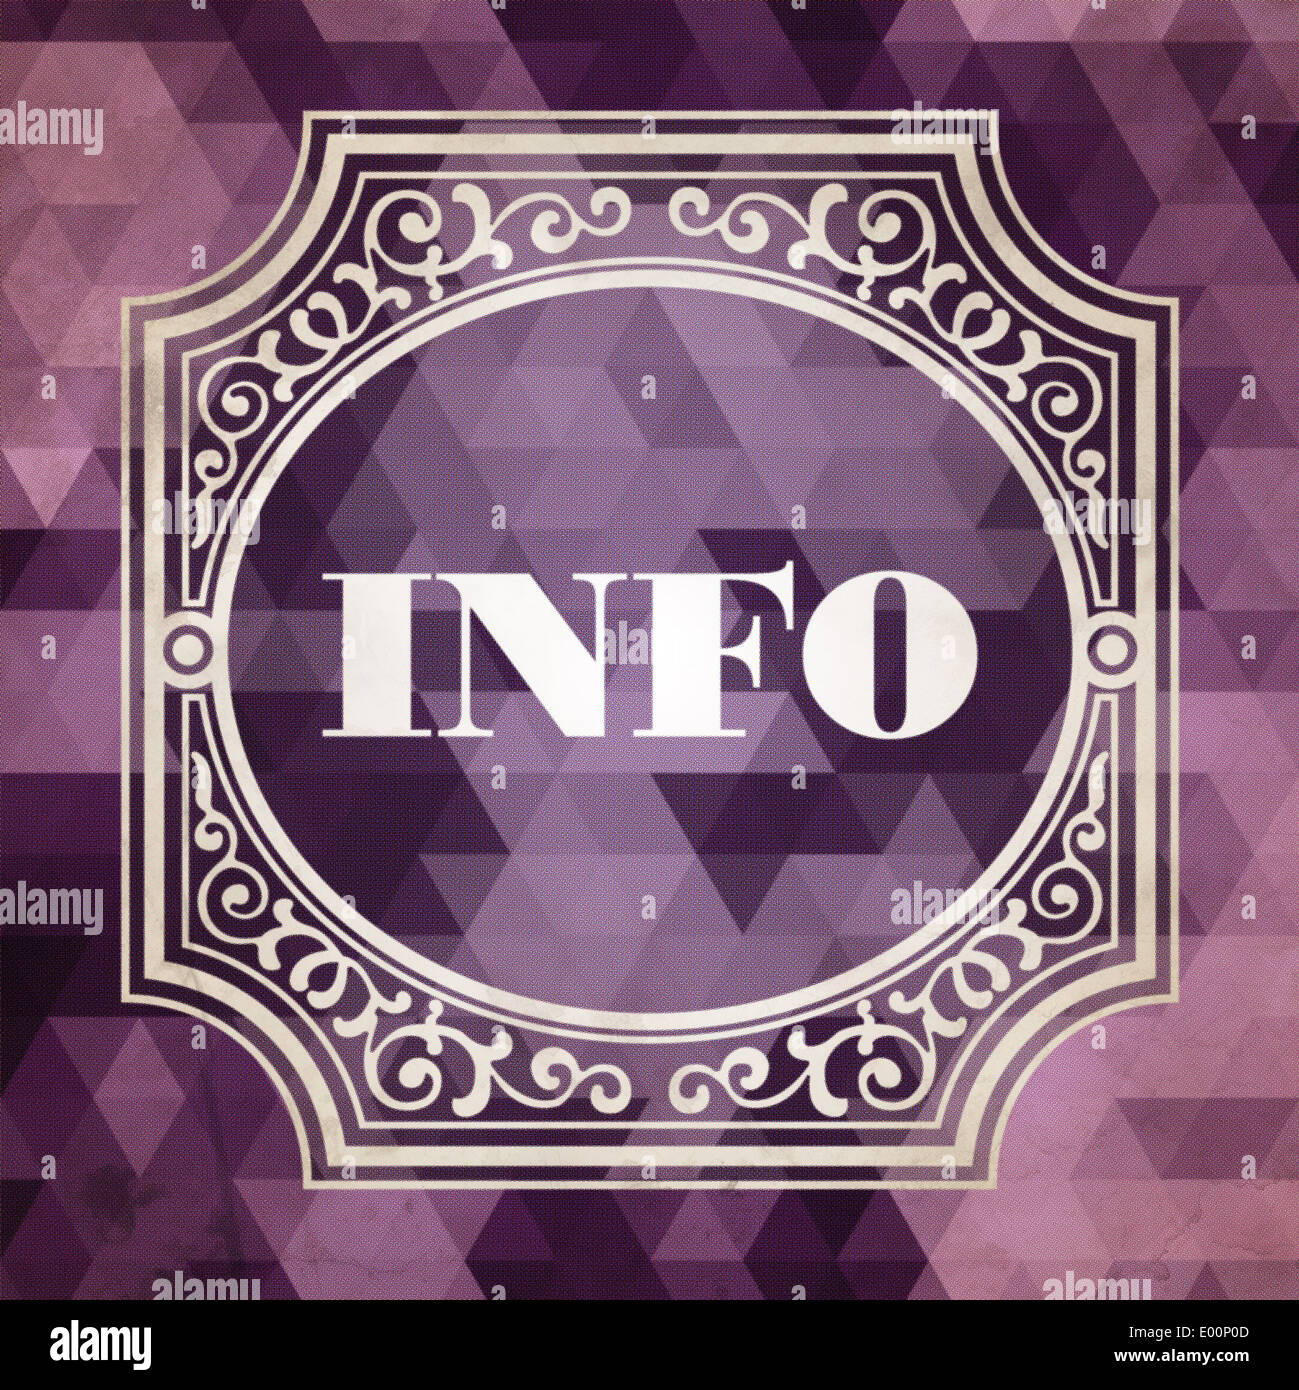 Info Concept. Vintage design. Purple Background made of Triangles. Stock Photo